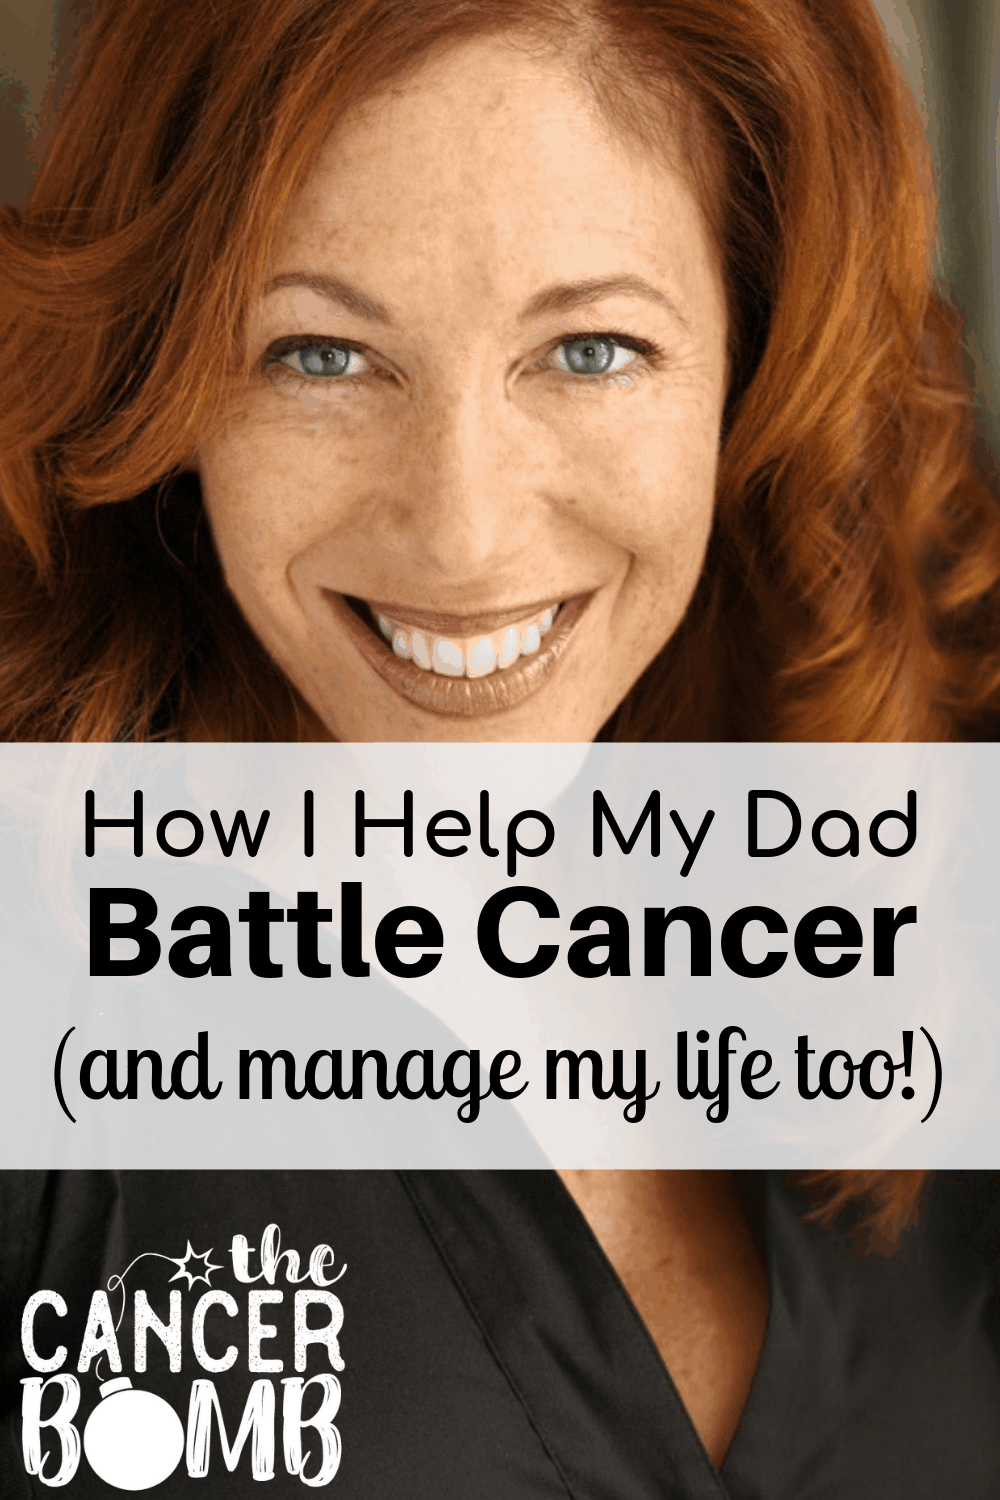 Finally! A resource that will help me manage my life with tips and ideas that actually work! How does anyone prioritize their own stuff when they are helping their loved one battle with cancer?? #fuckcancer #Ideasthatactuallywork